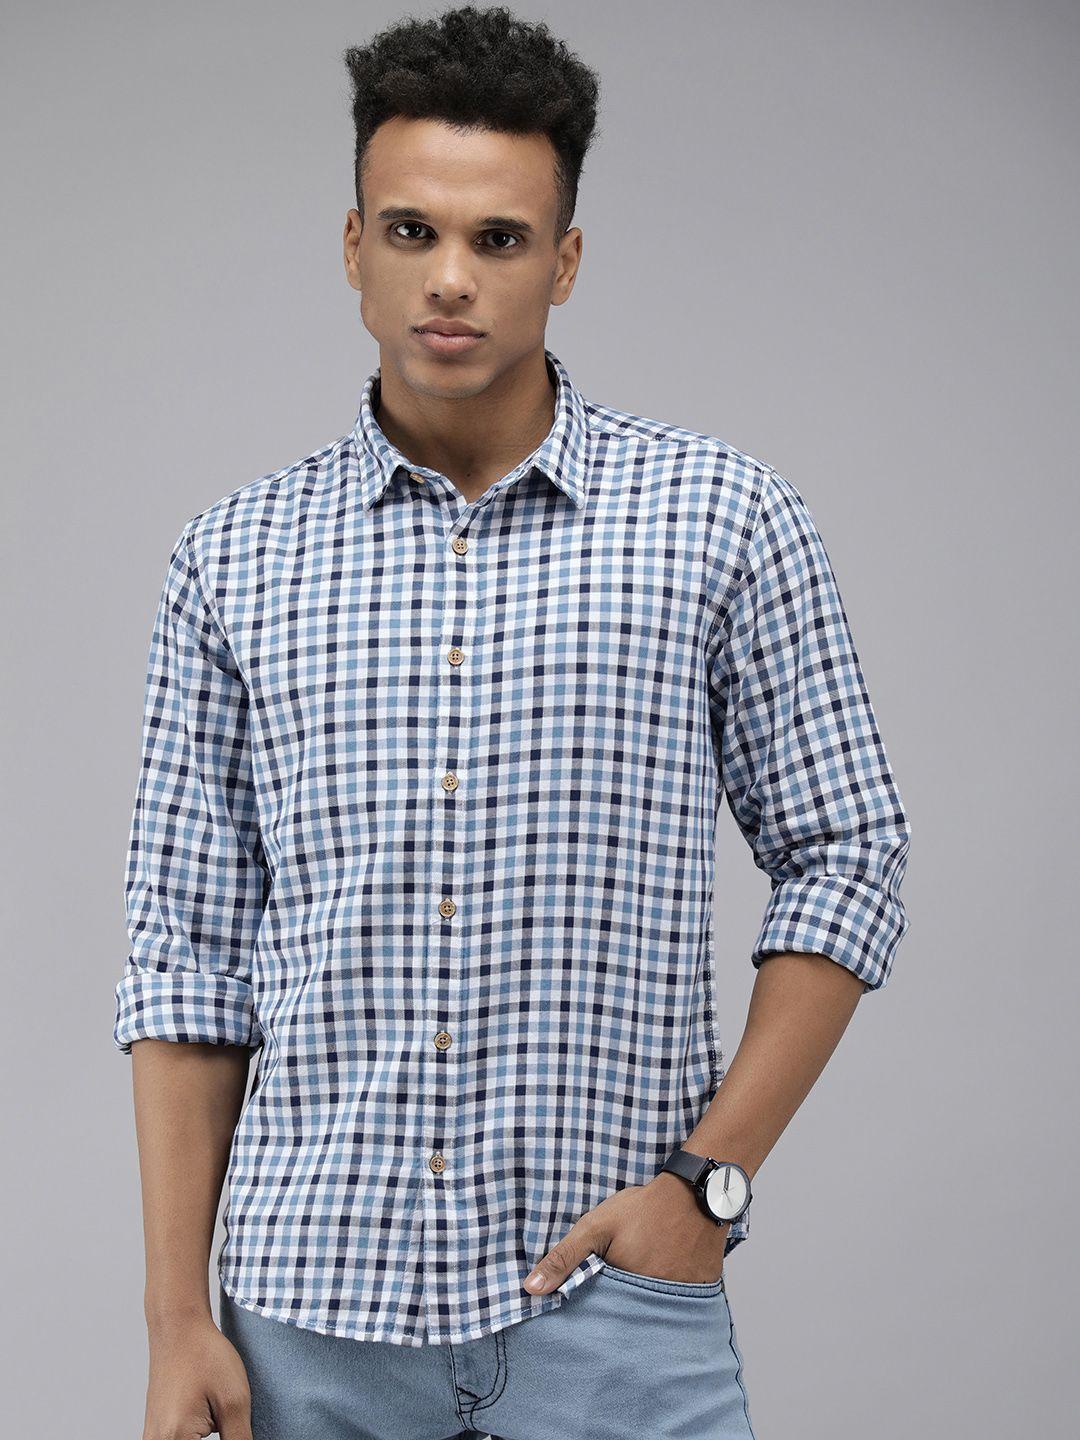 beat london by pepe jeans men blue and white classic slim fit checked pure cotton shirt